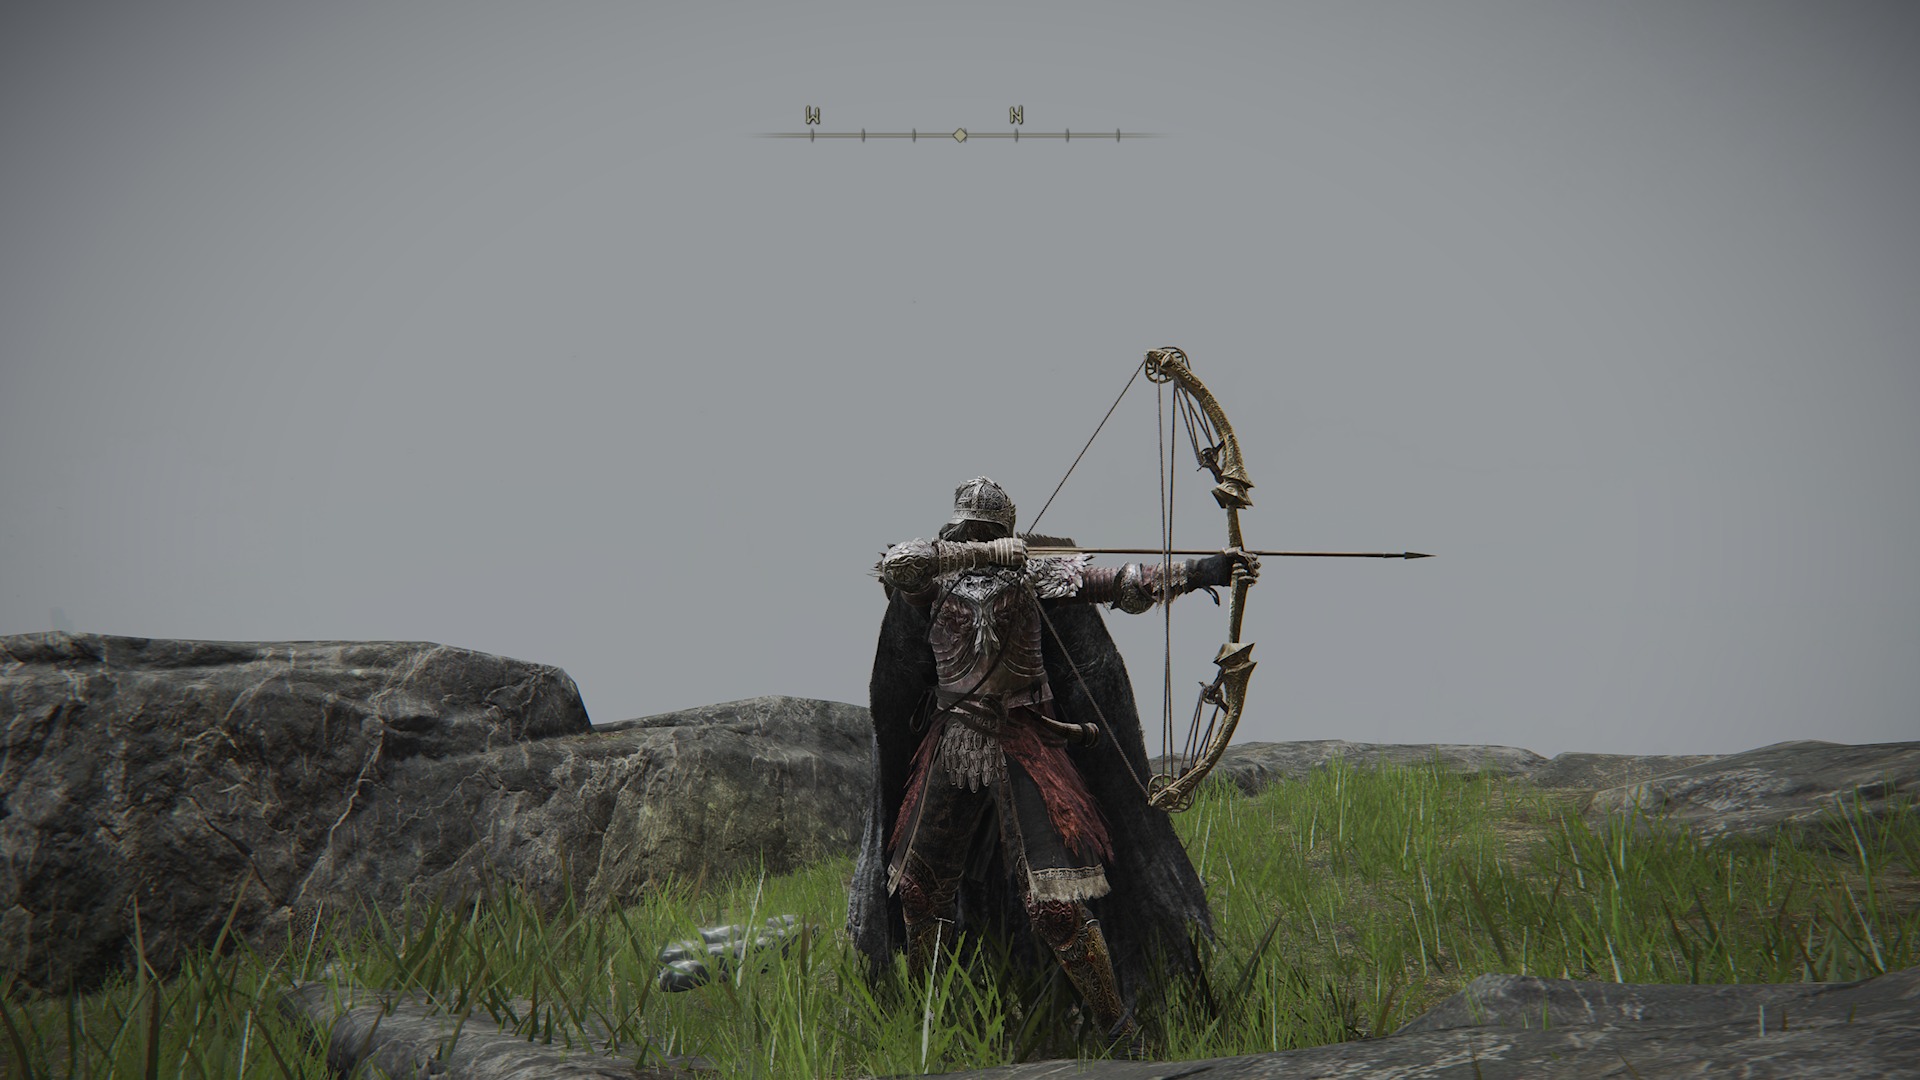 Elden Ring Bow Build Weapons, Gear & Playstyle